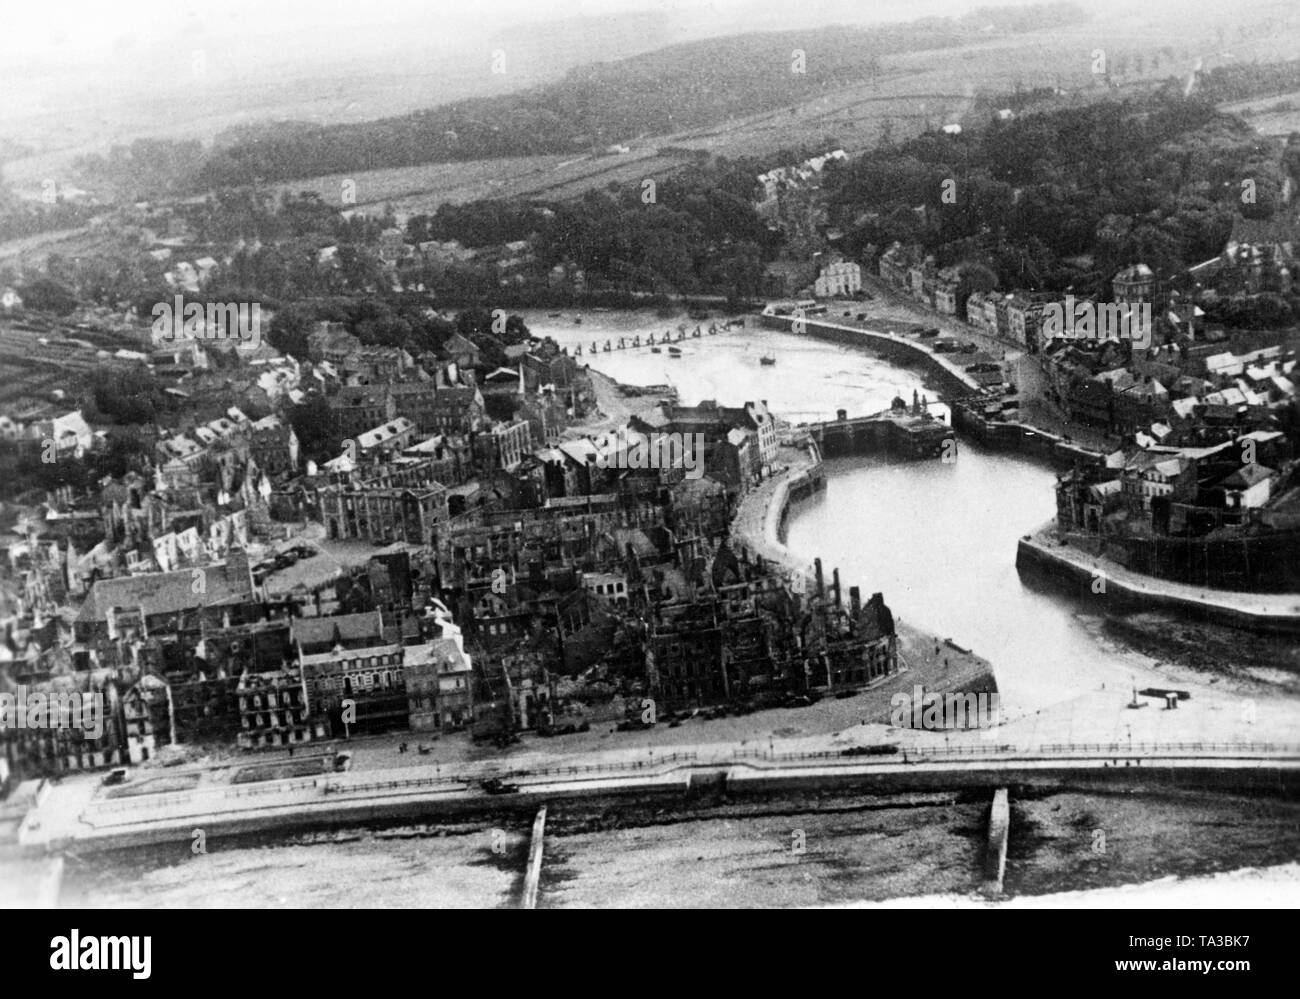 View from a German fighter onto a French port community. Luftwaffe bombers destroyed the locks. Photo: war correspondent Wundshammer. Stock Photo